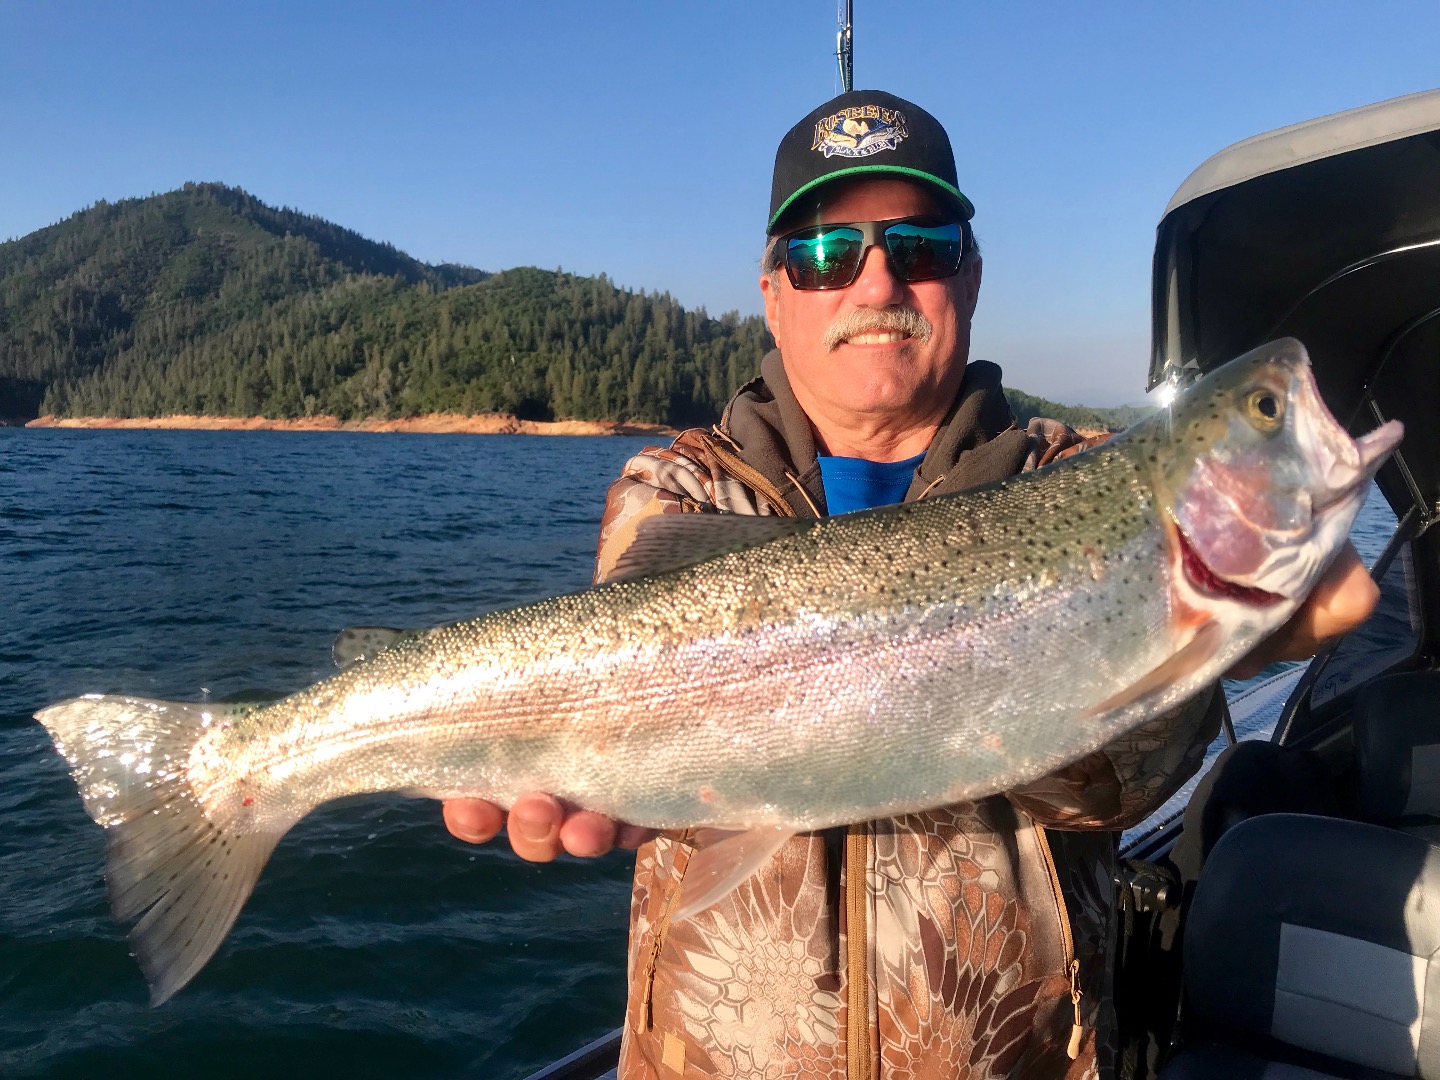 Shasta's lunker rainbows are back!